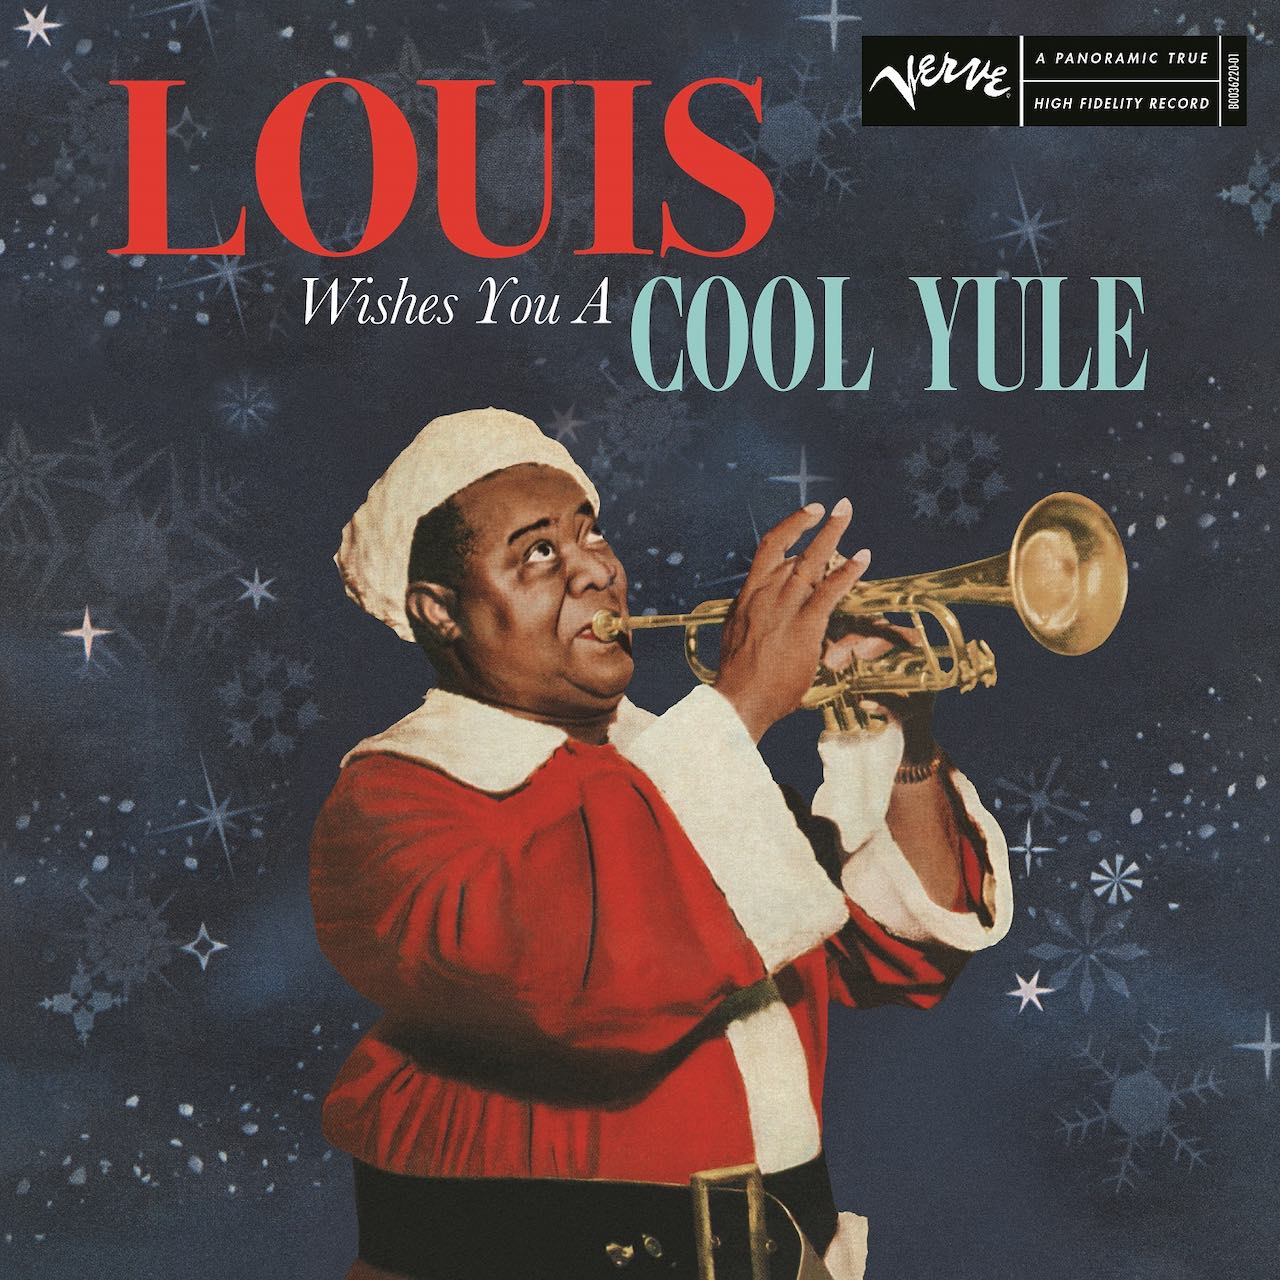 Louis Armstrong’s Holiday Classic ‘White Christmas’ Receives Official Music Video